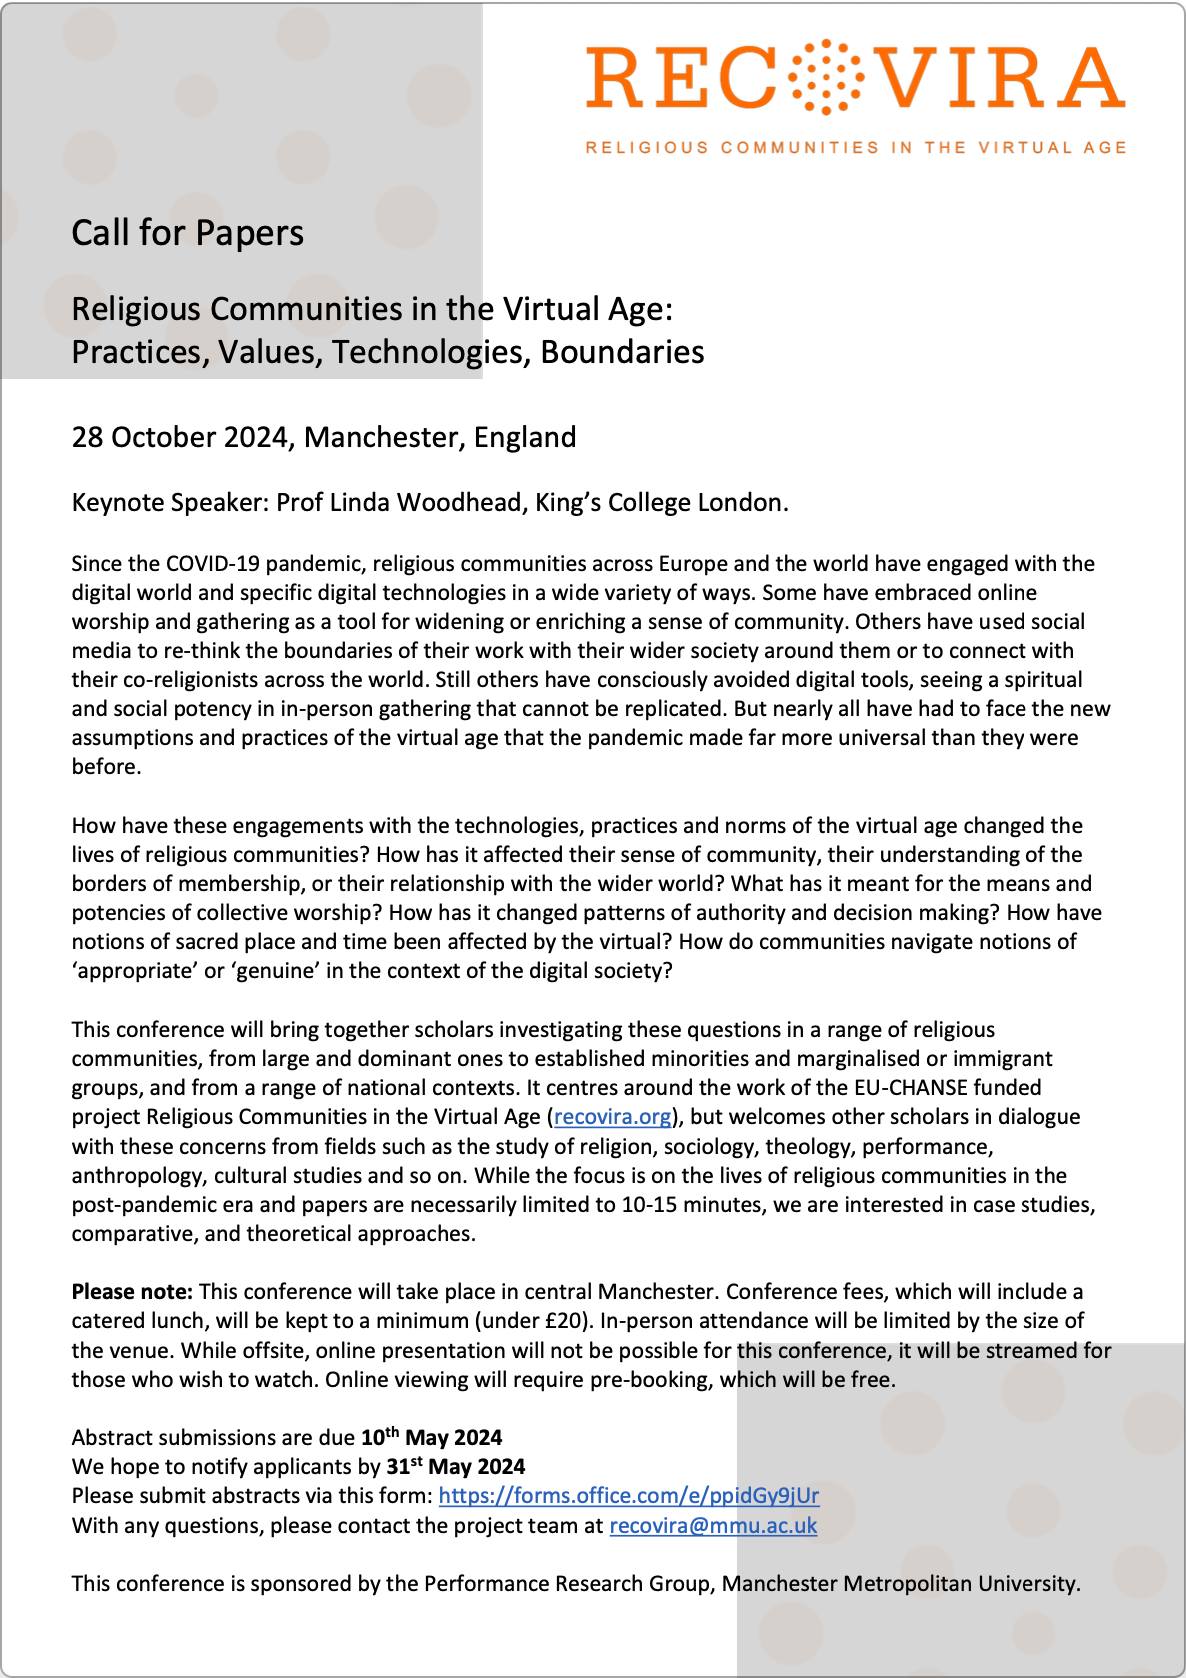 CALL FOR PAPERS - Religious Communities in the Virtual Age